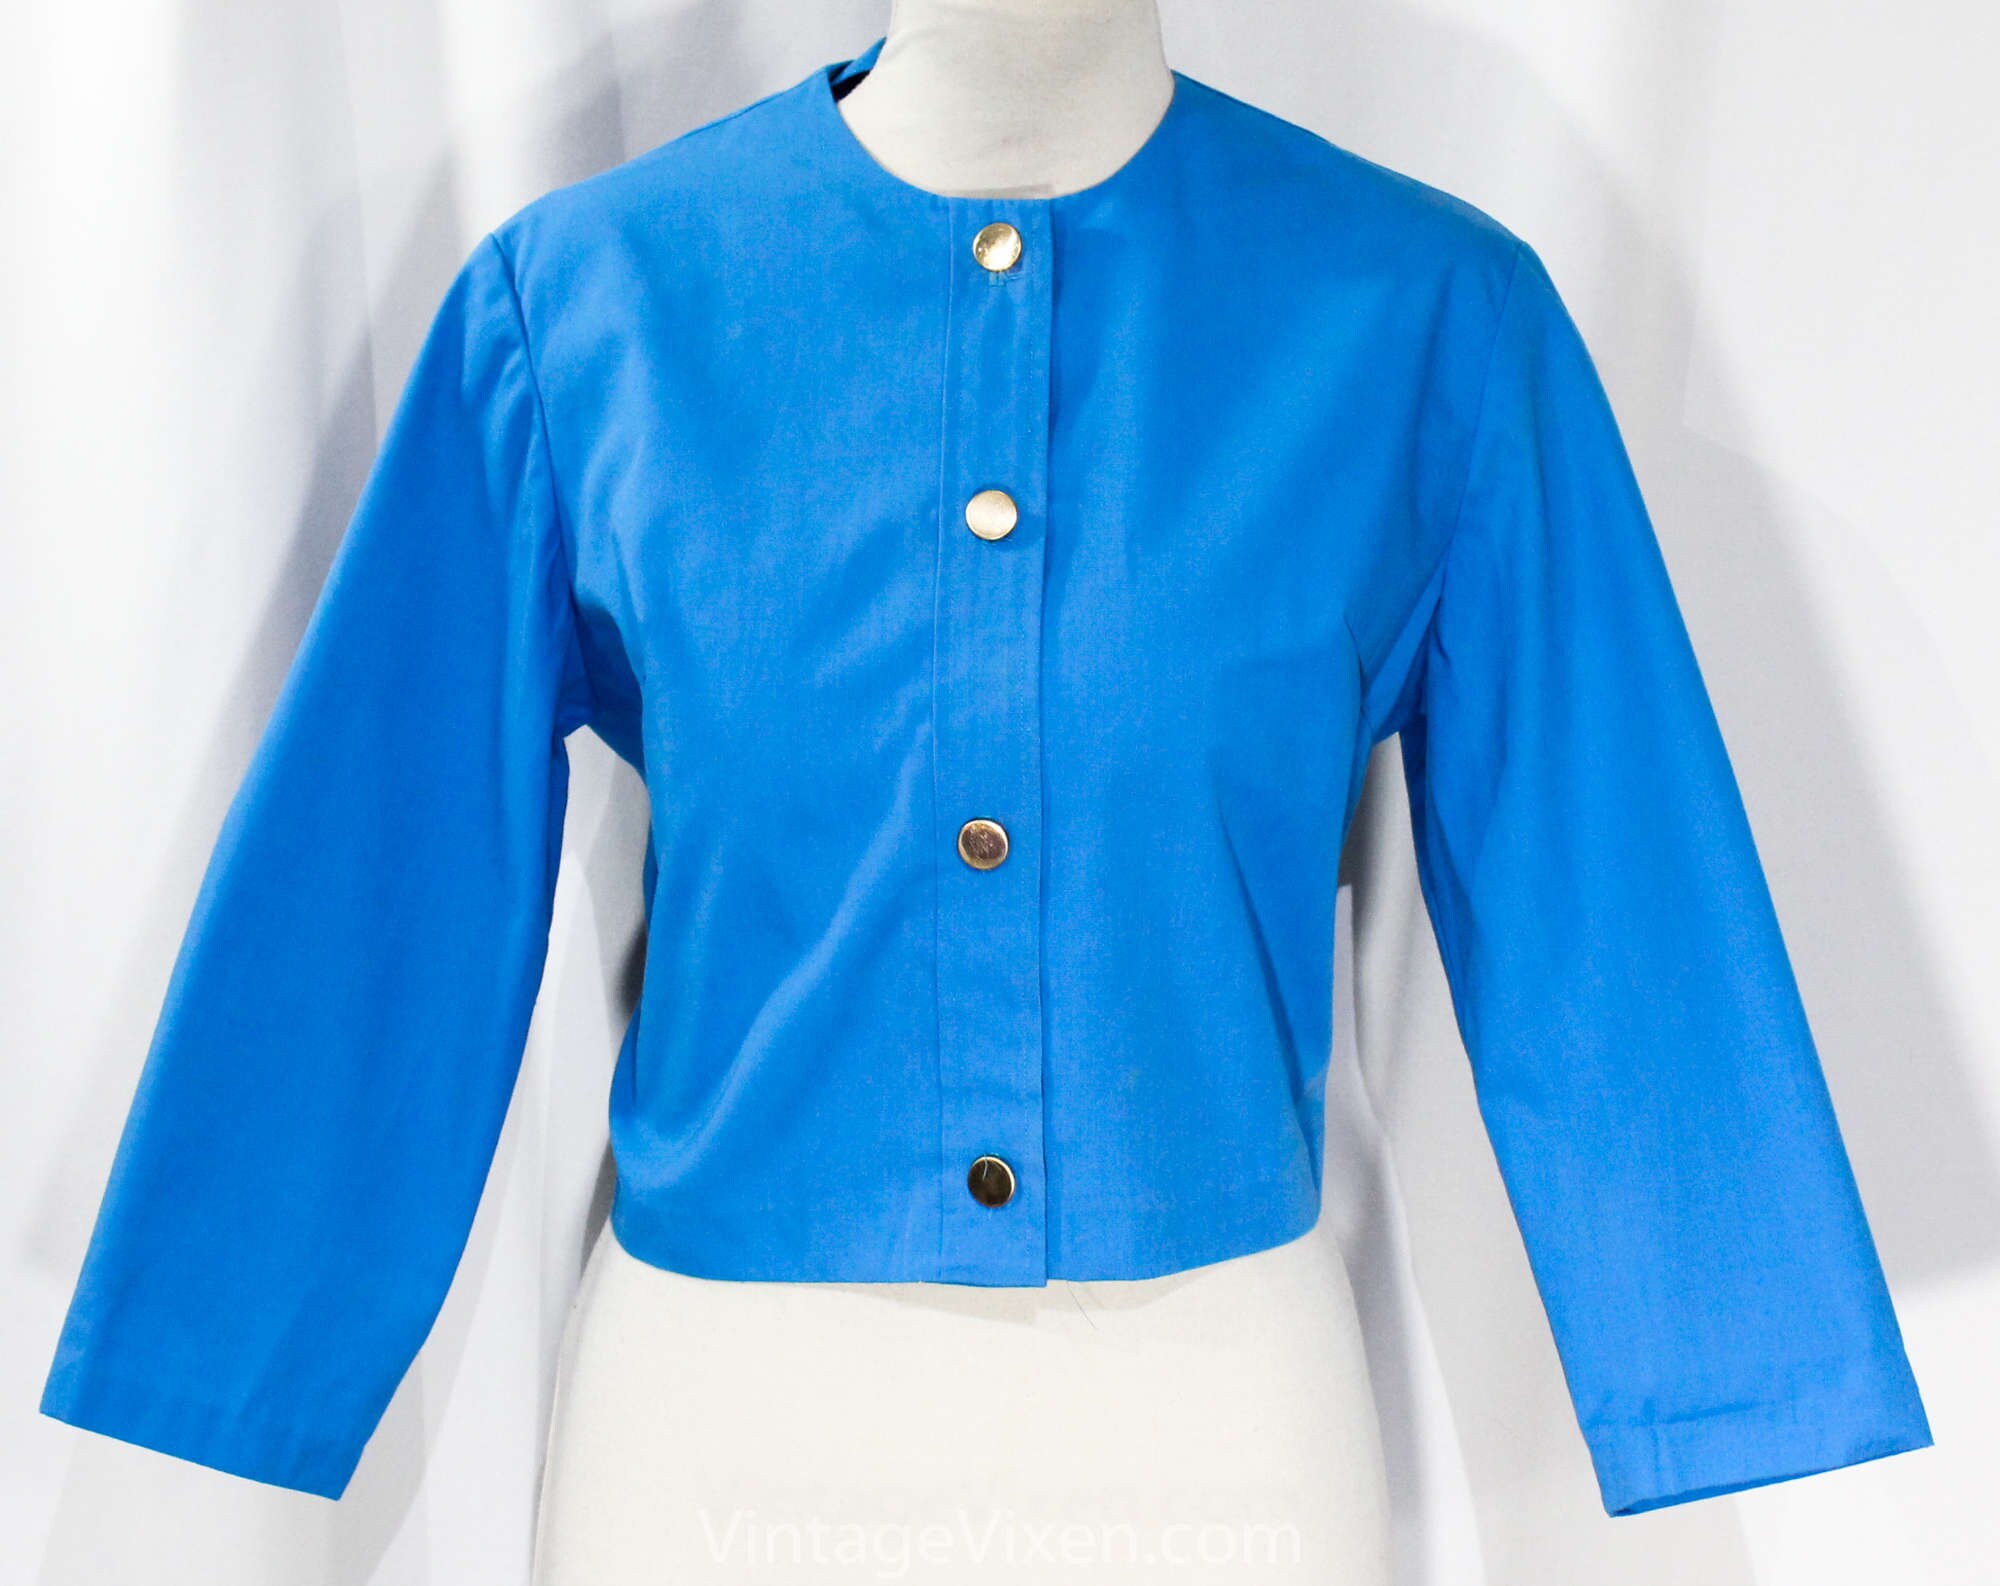 Size 12 Blue Shirt - 1960S Cotton Blend Tailored Blouse With Brassy Buttons 3/4 Sleeve Top Spring Summer 60S Secretary Style Bust 38